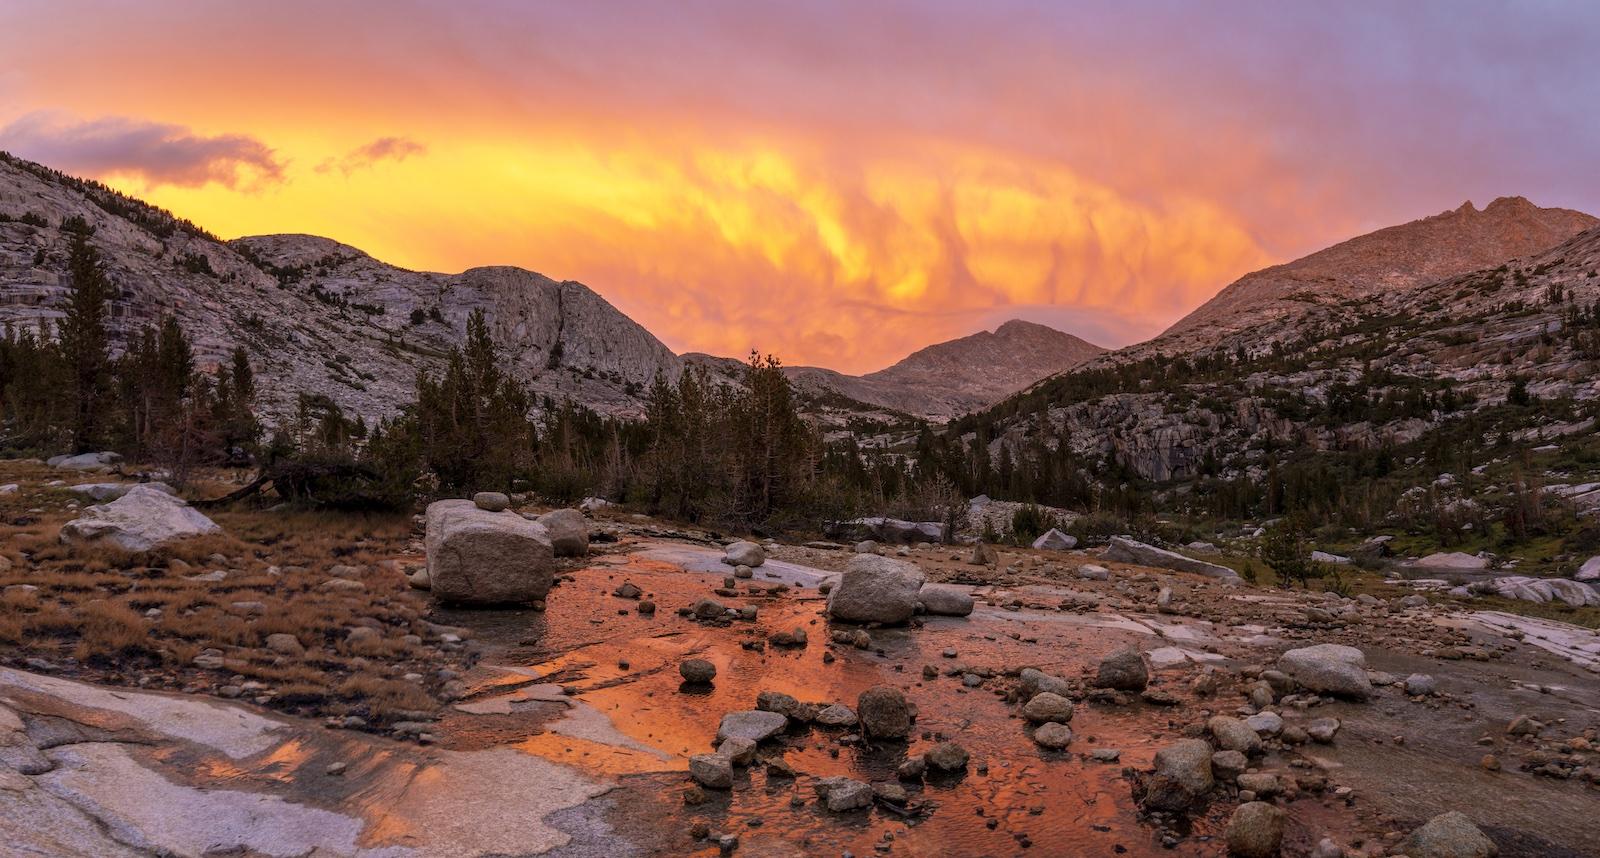 Sunset near the Lake Italy Trail in the Sierras